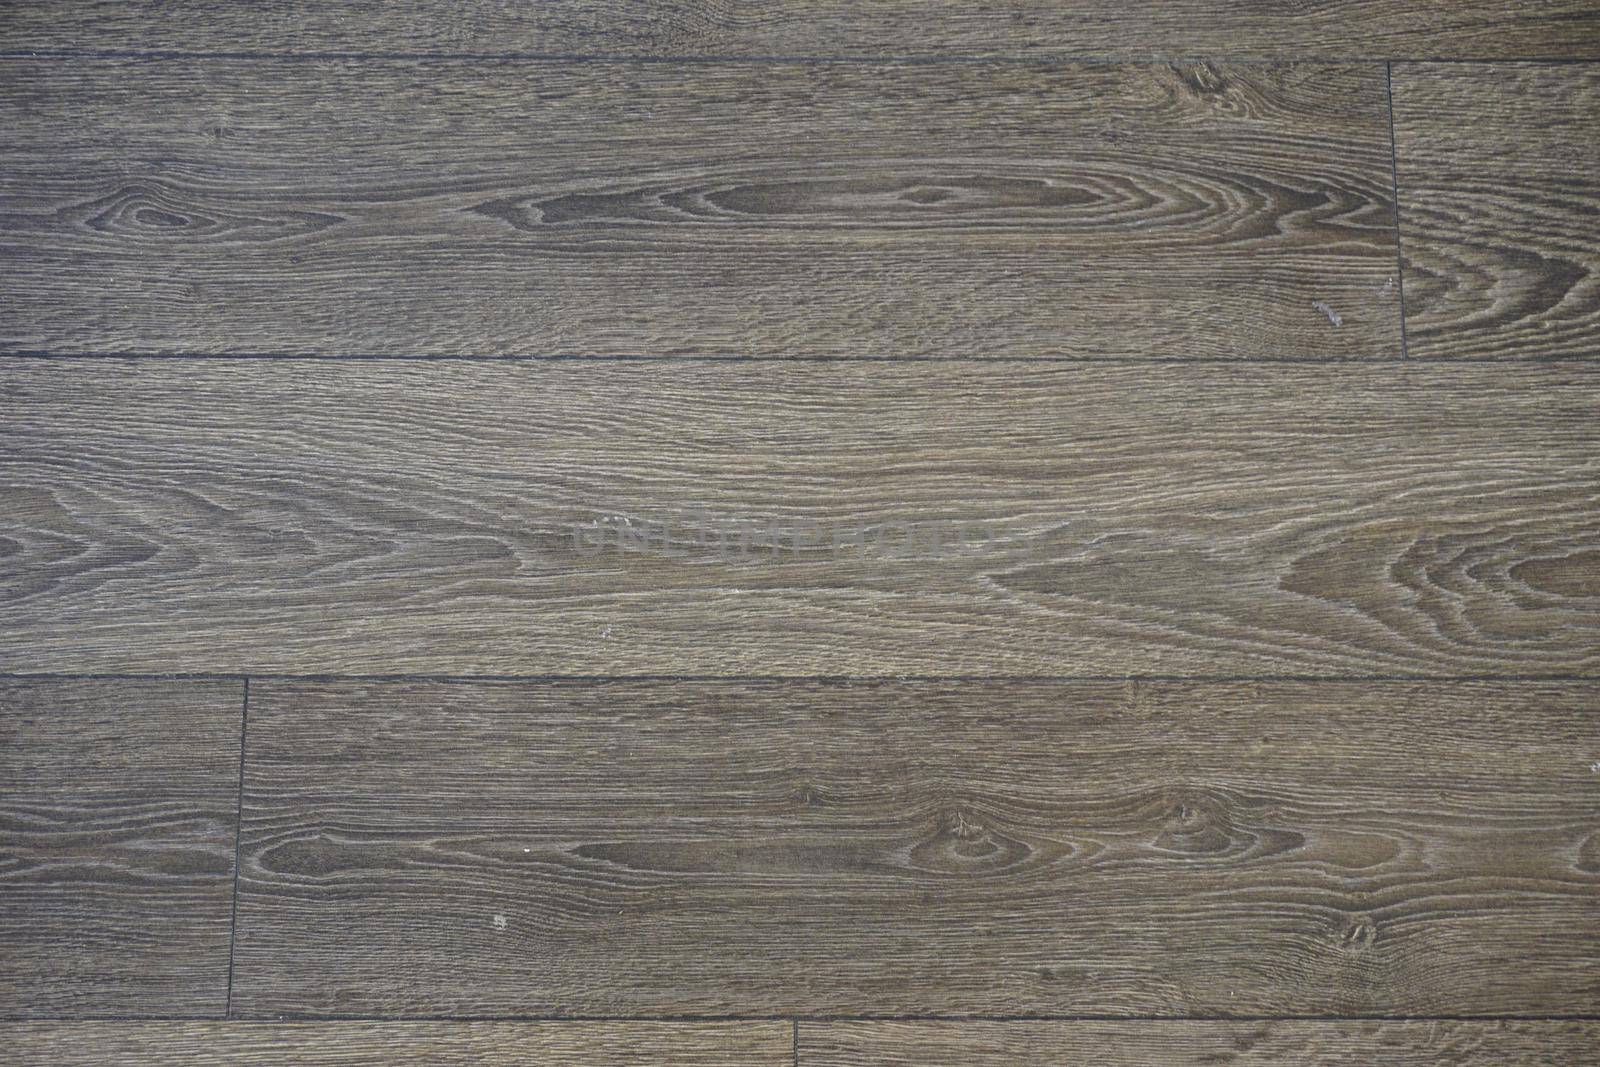 ceramic tiles with wood grain effect. High quality photo